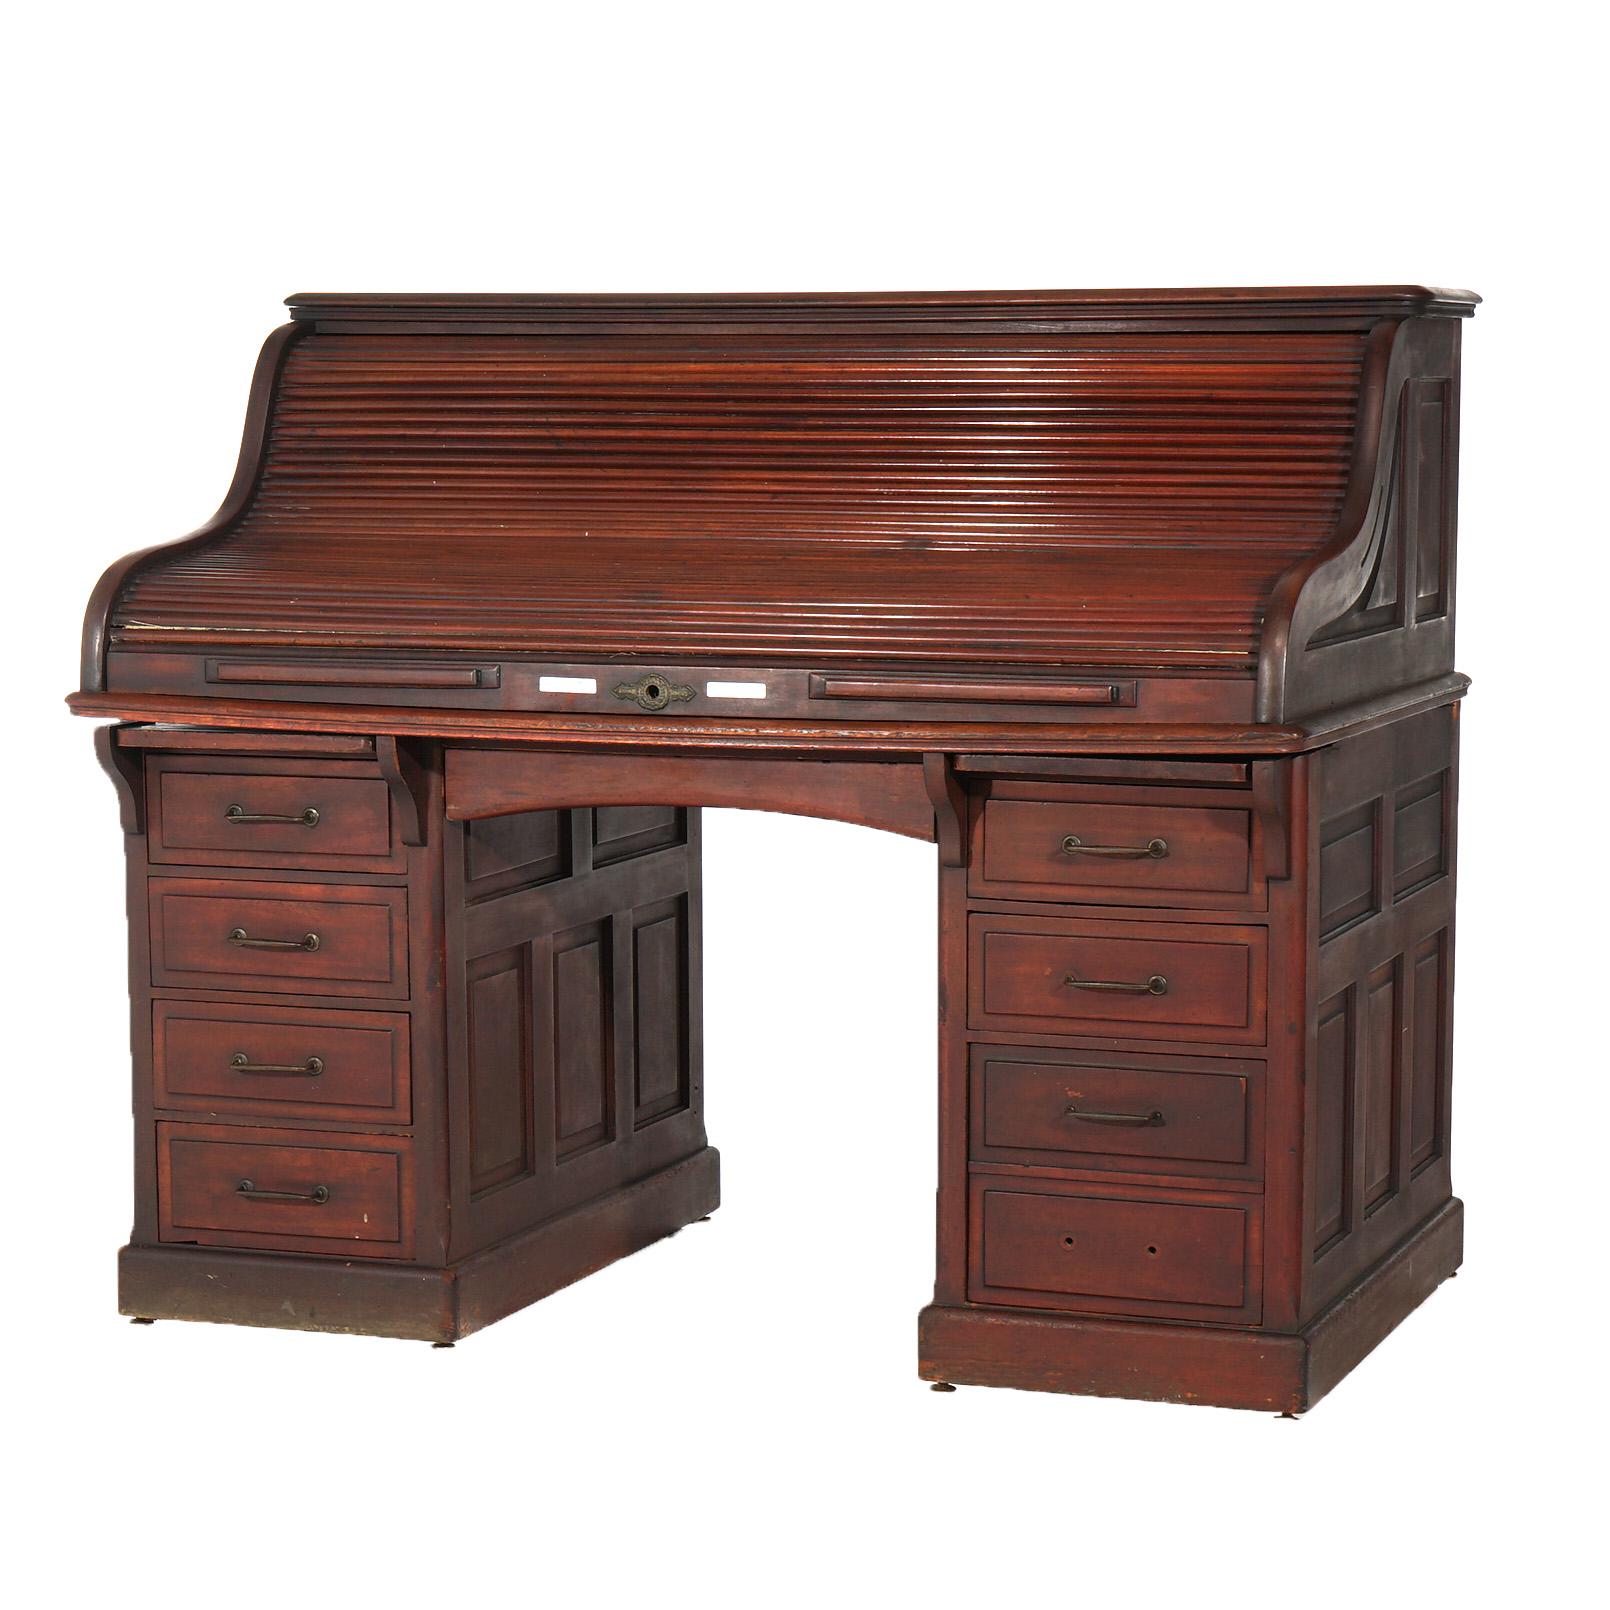 An antique desk by Gunn offers paneled mahogany construction with s-roll top opening to full interior, purportedly owned by notable sea captain John Craig, maker label as photographed, c1850

Measures - 49.75